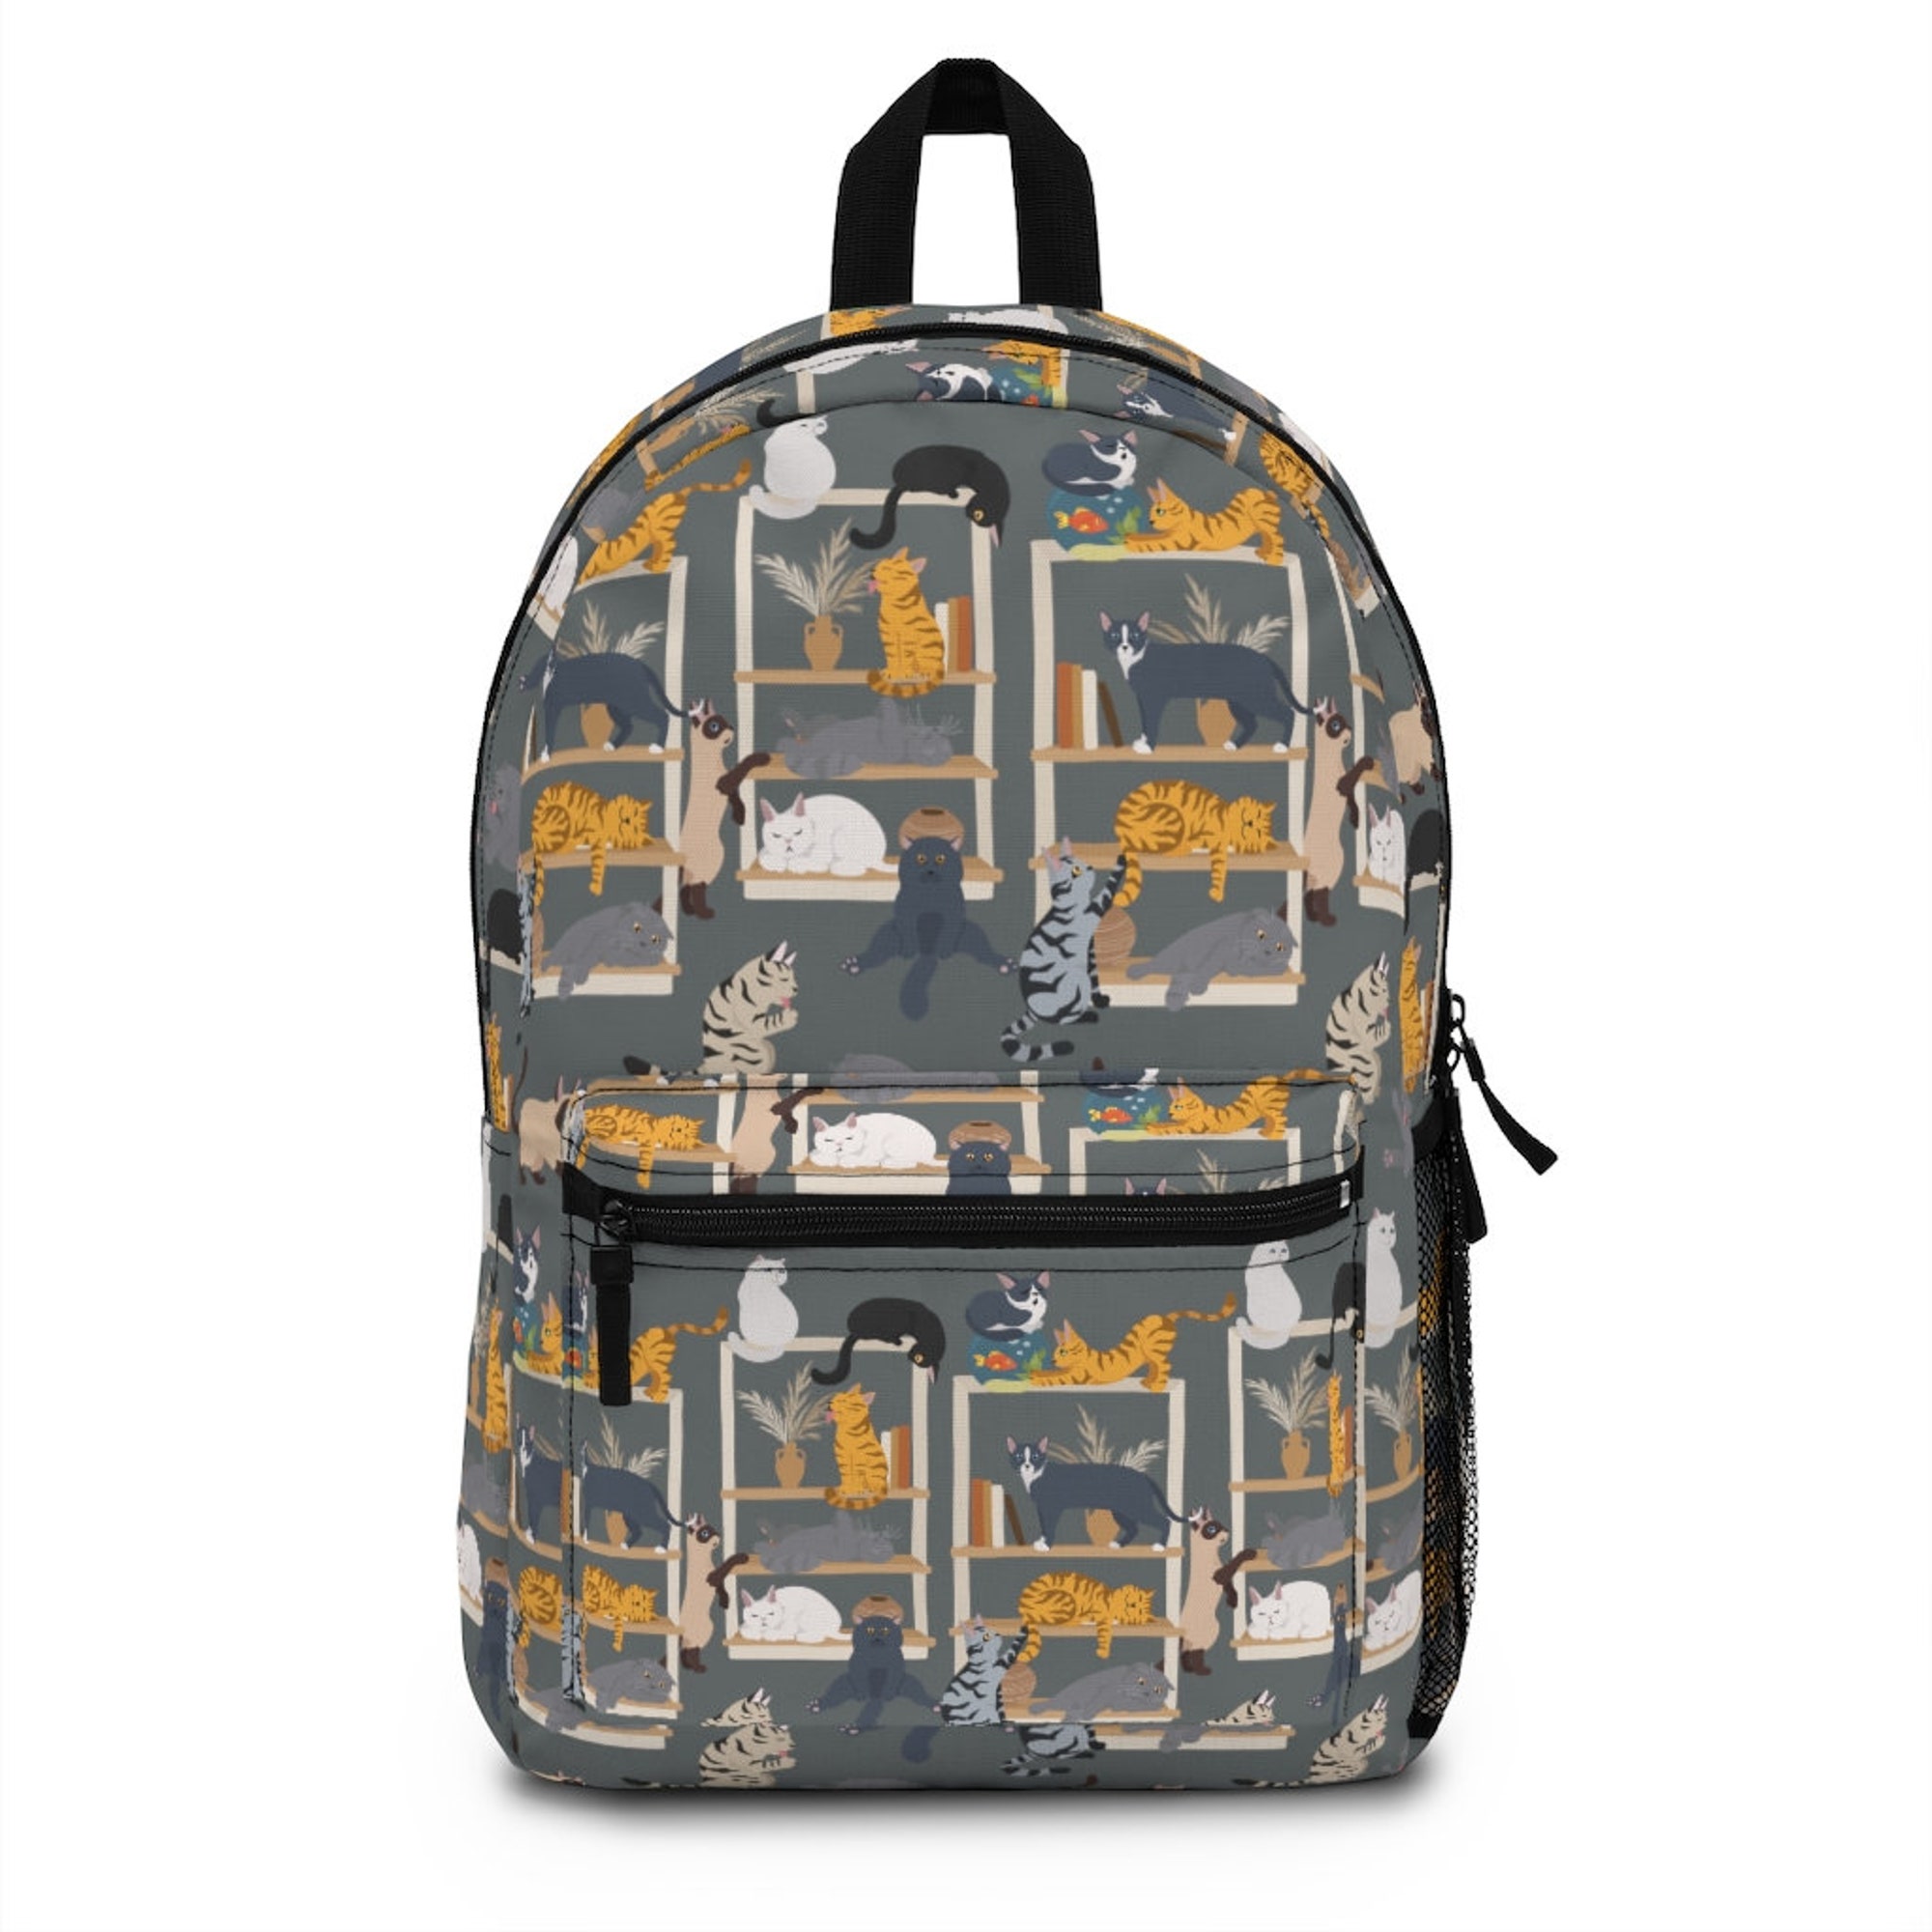 All the Cats Backpack, Cat Lover's School Bag